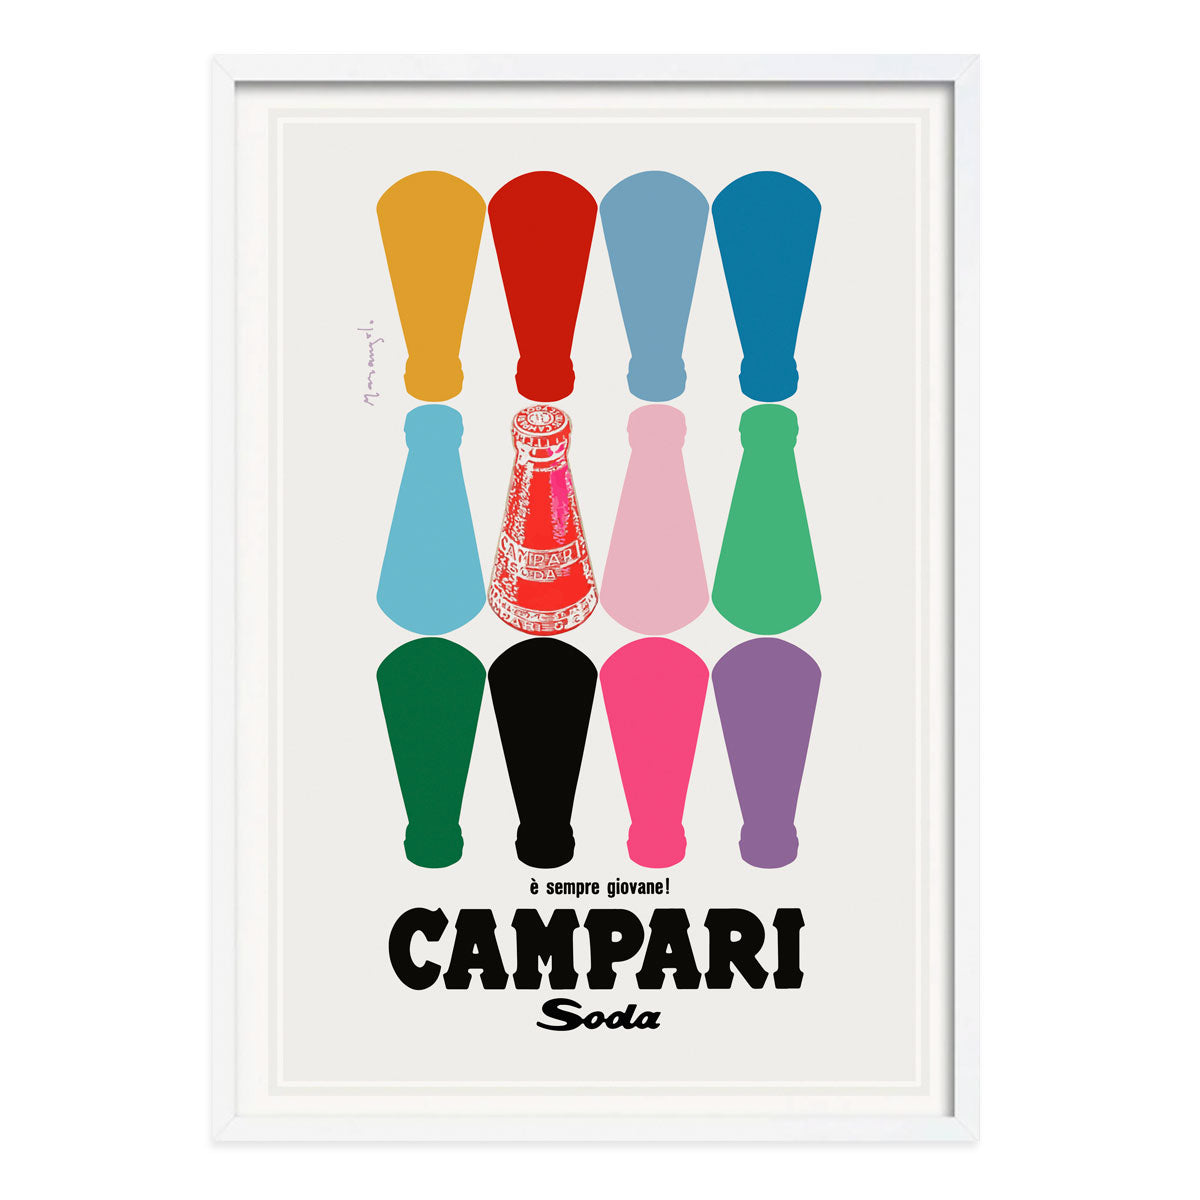 Campari Soda #2 vintage retro advertising poster in white frame from Places We Luv